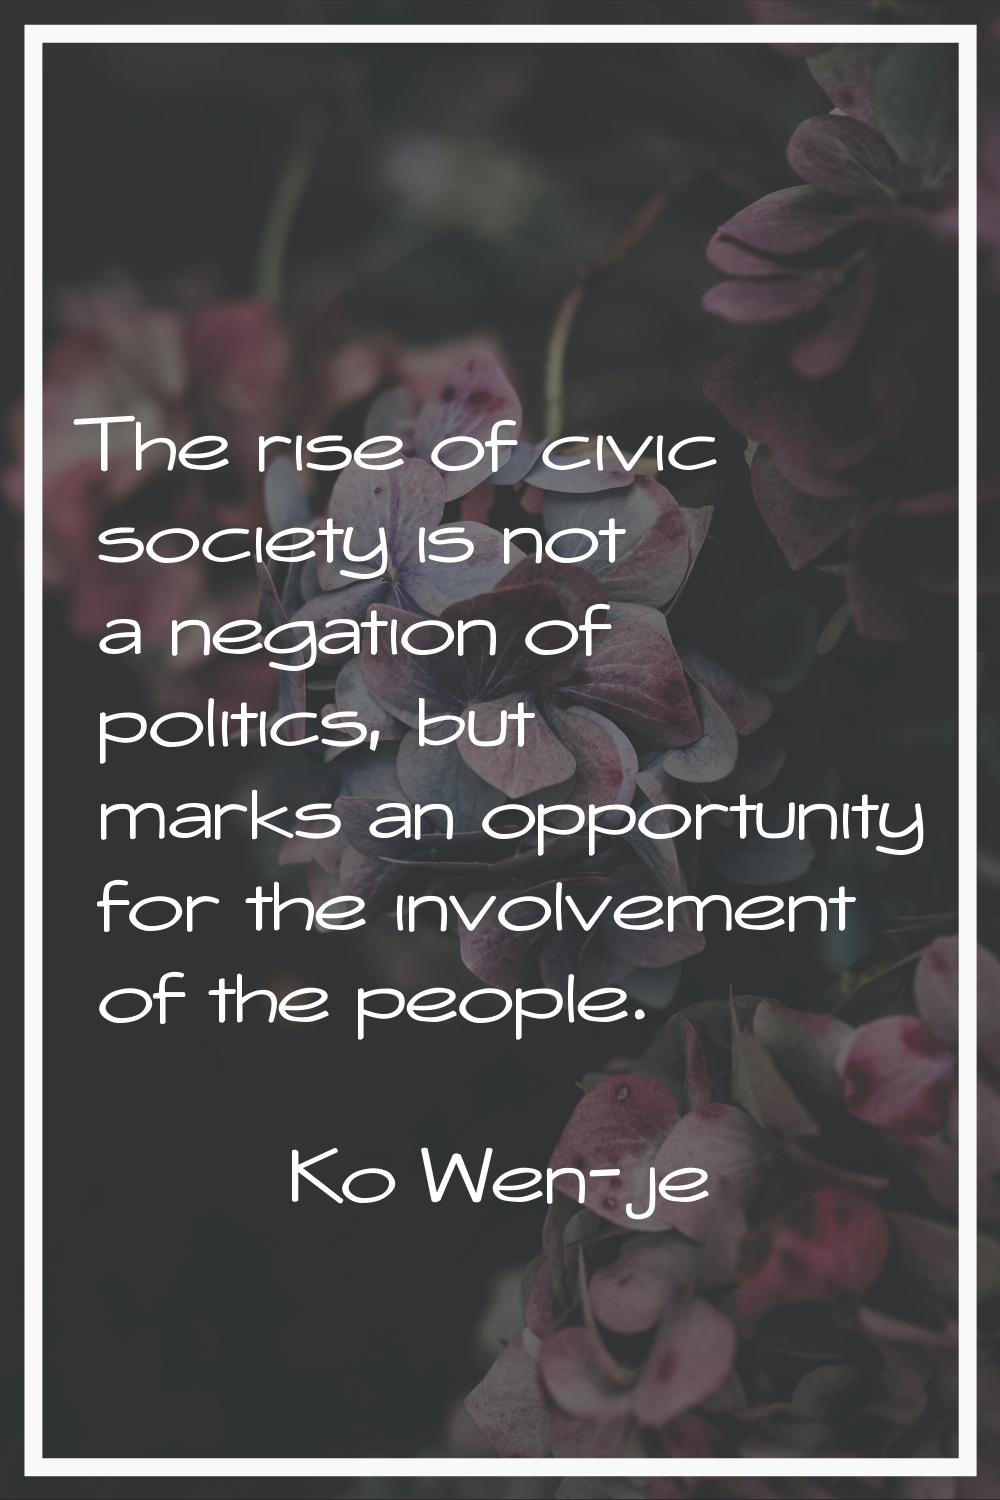 The rise of civic society is not a negation of politics, but marks an opportunity for the involveme